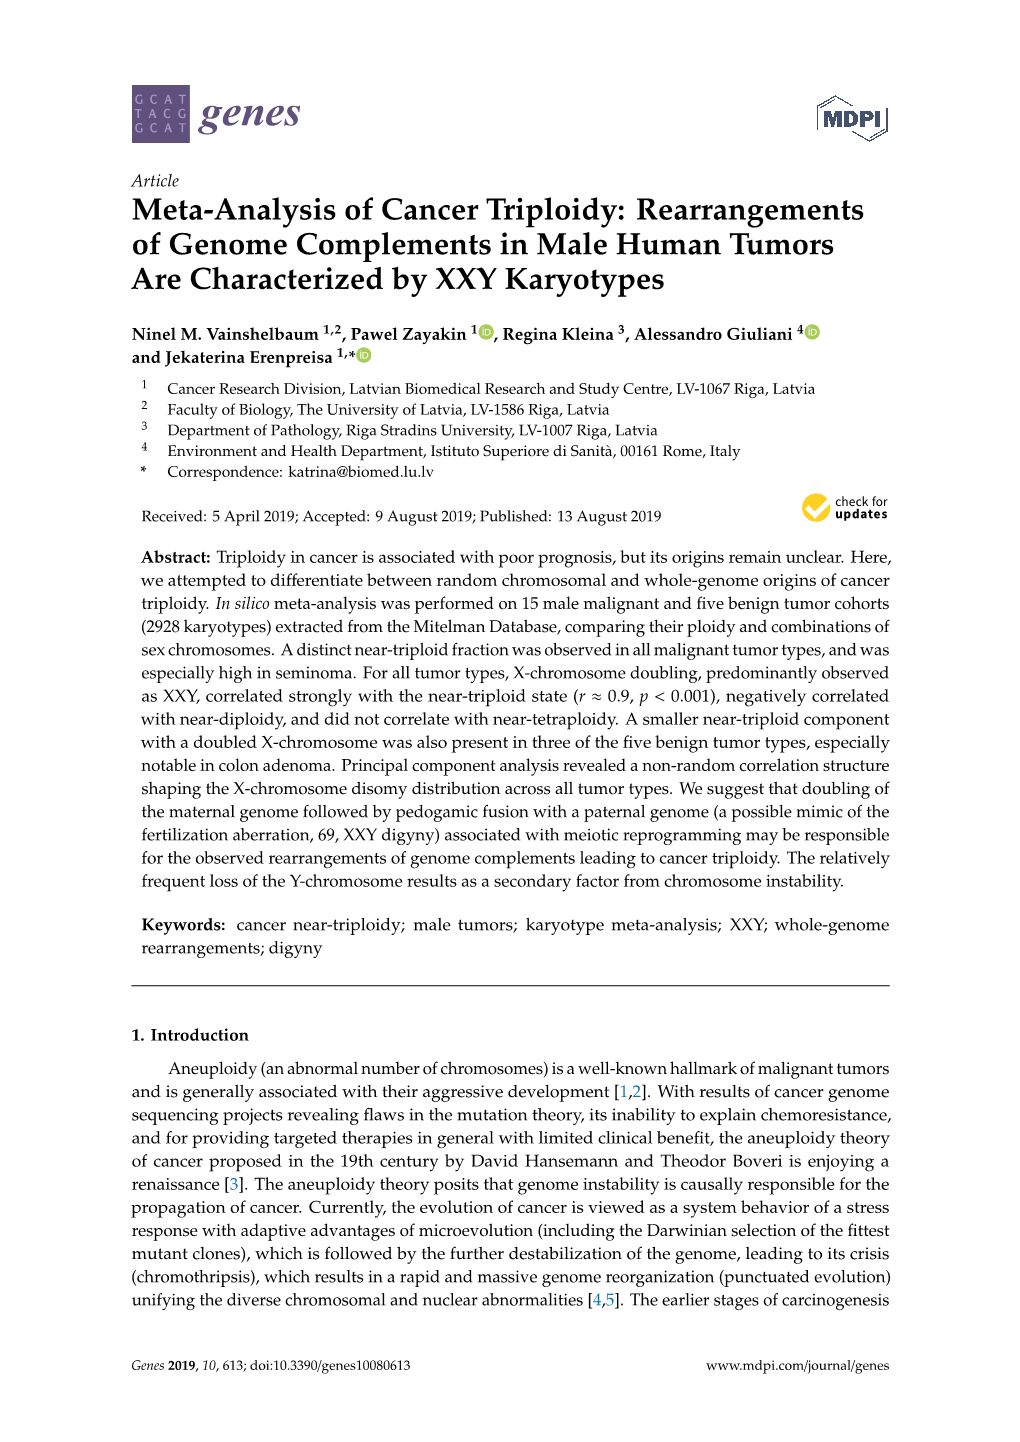 Meta-Analysis of Cancer Triploidy: Rearrangements of Genome Complements in Male Human Tumors Are Characterized by XXY Karyotypes